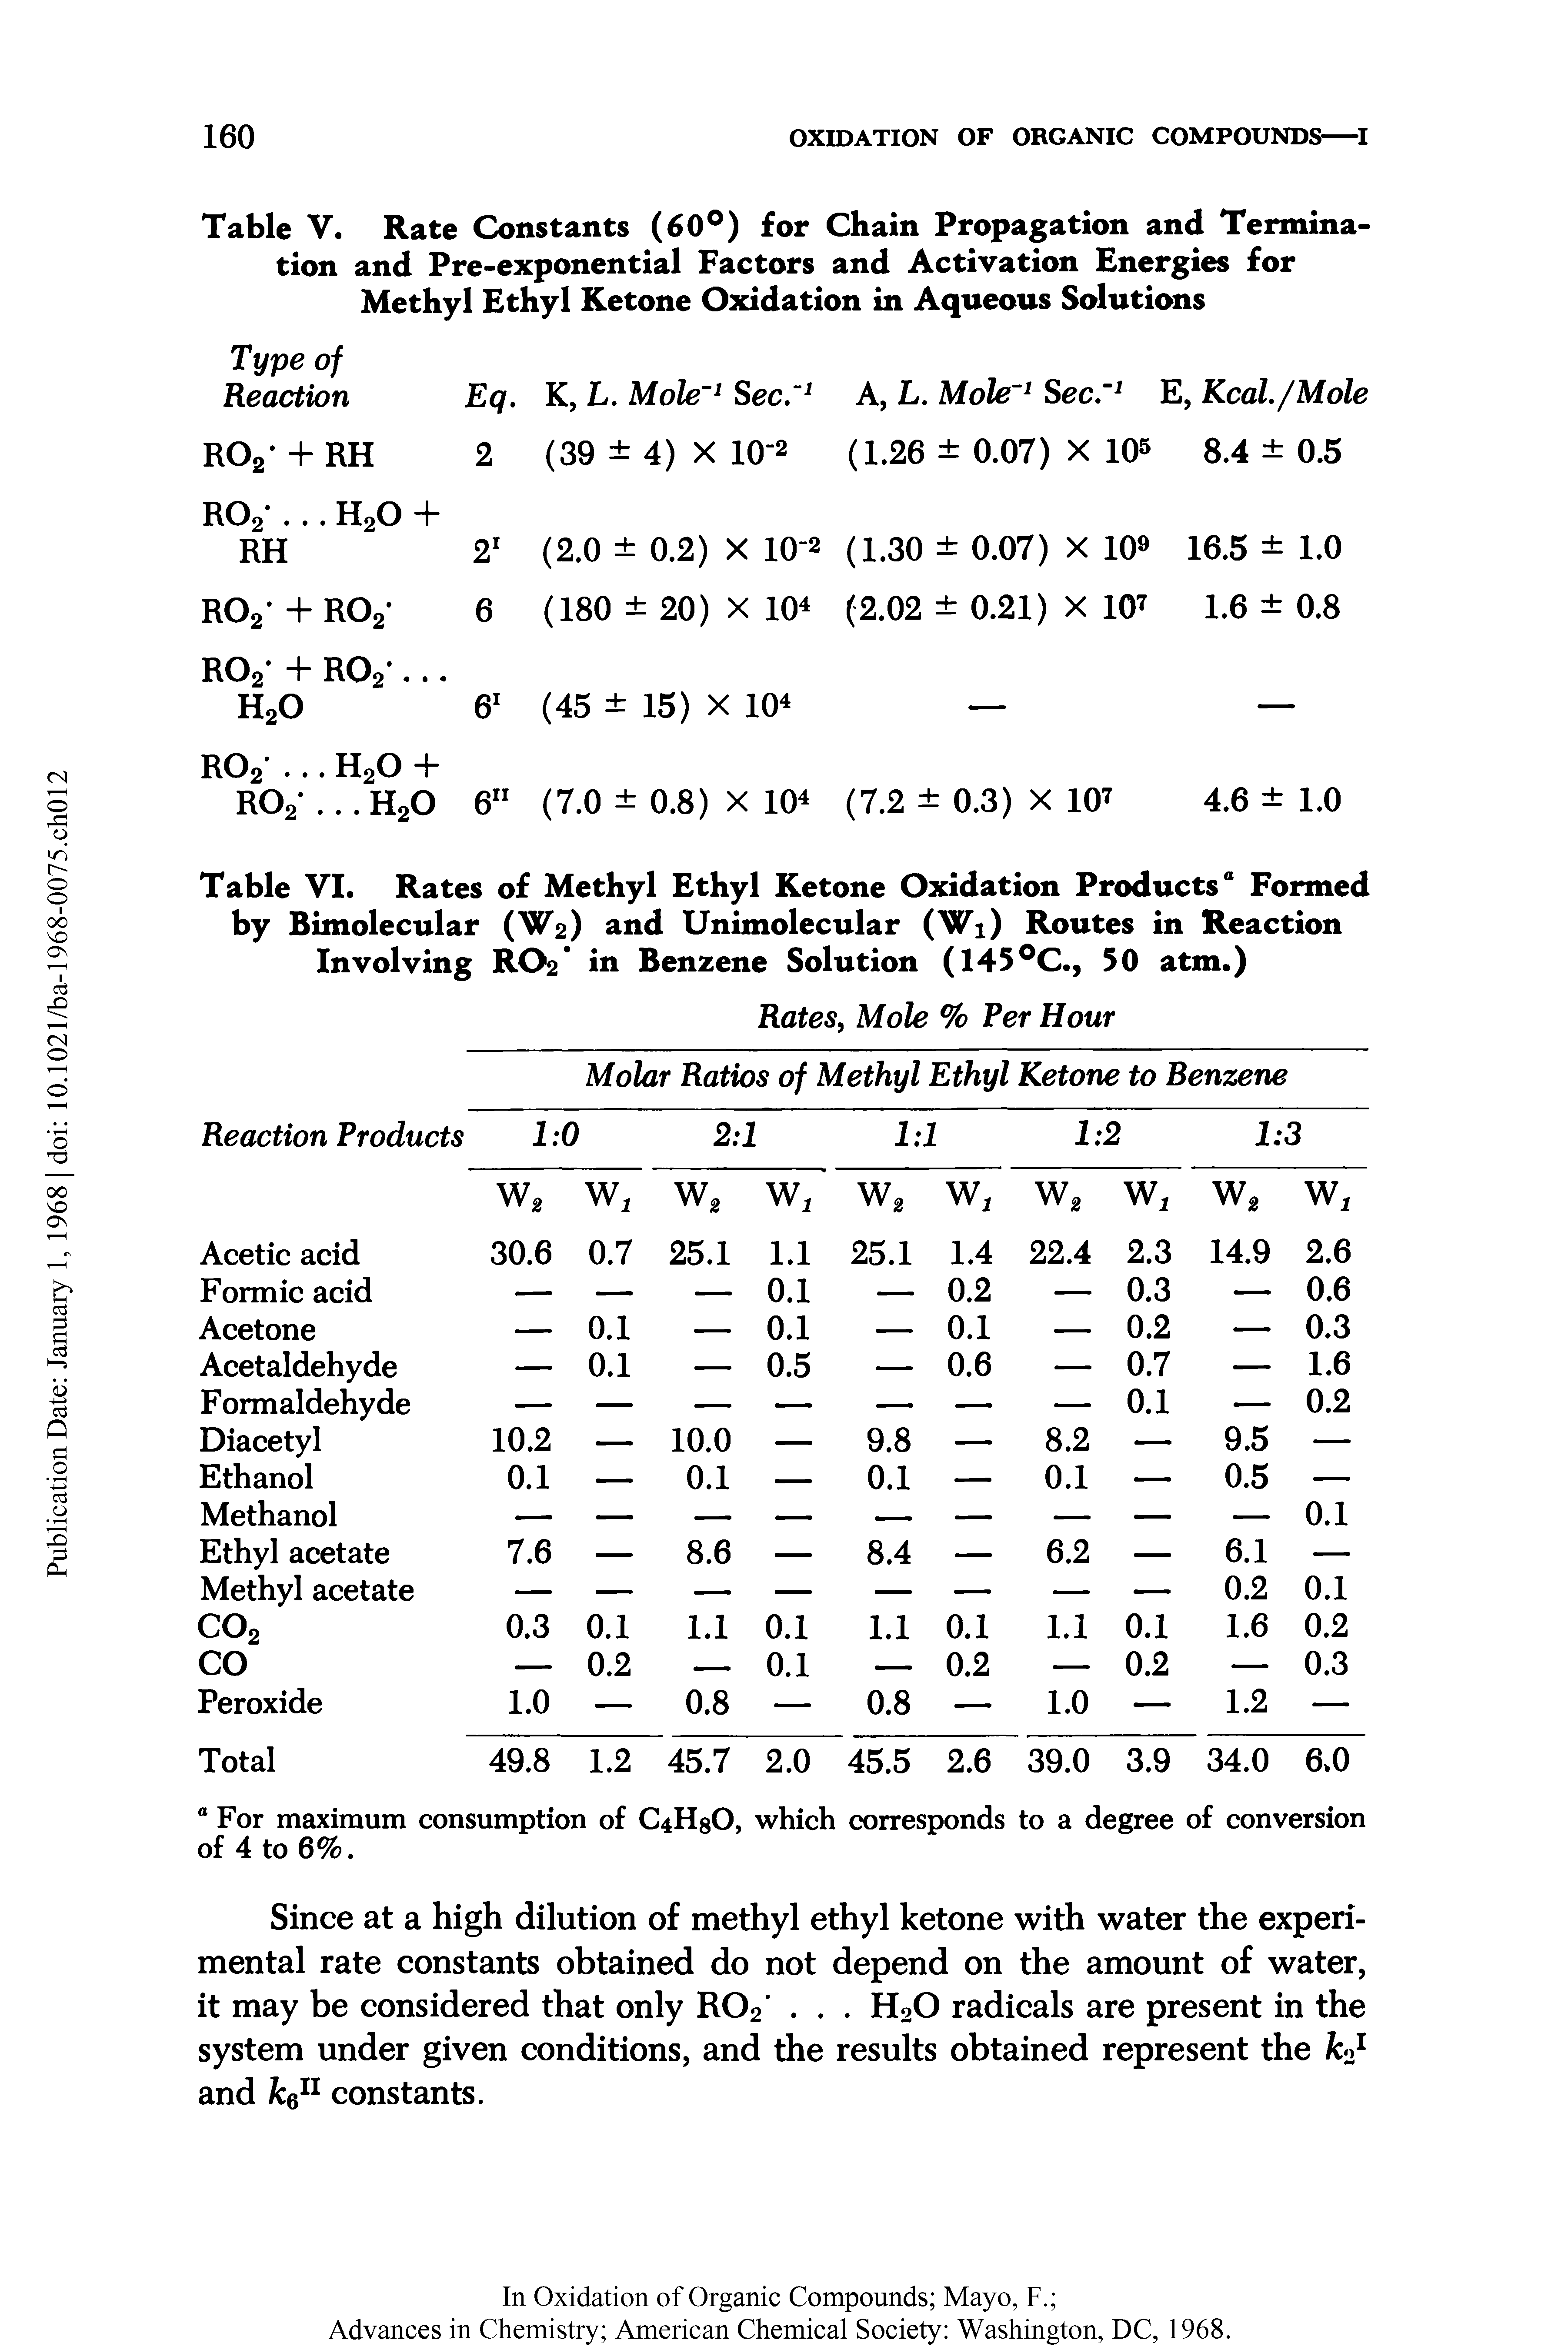 Table V. Rate Constants (60°) for Chain Propagation and Termination and Pre-exponential Factors and Activation Energies for Methyl Ethyl Ketone Oxidation in Aqueous Solutions...